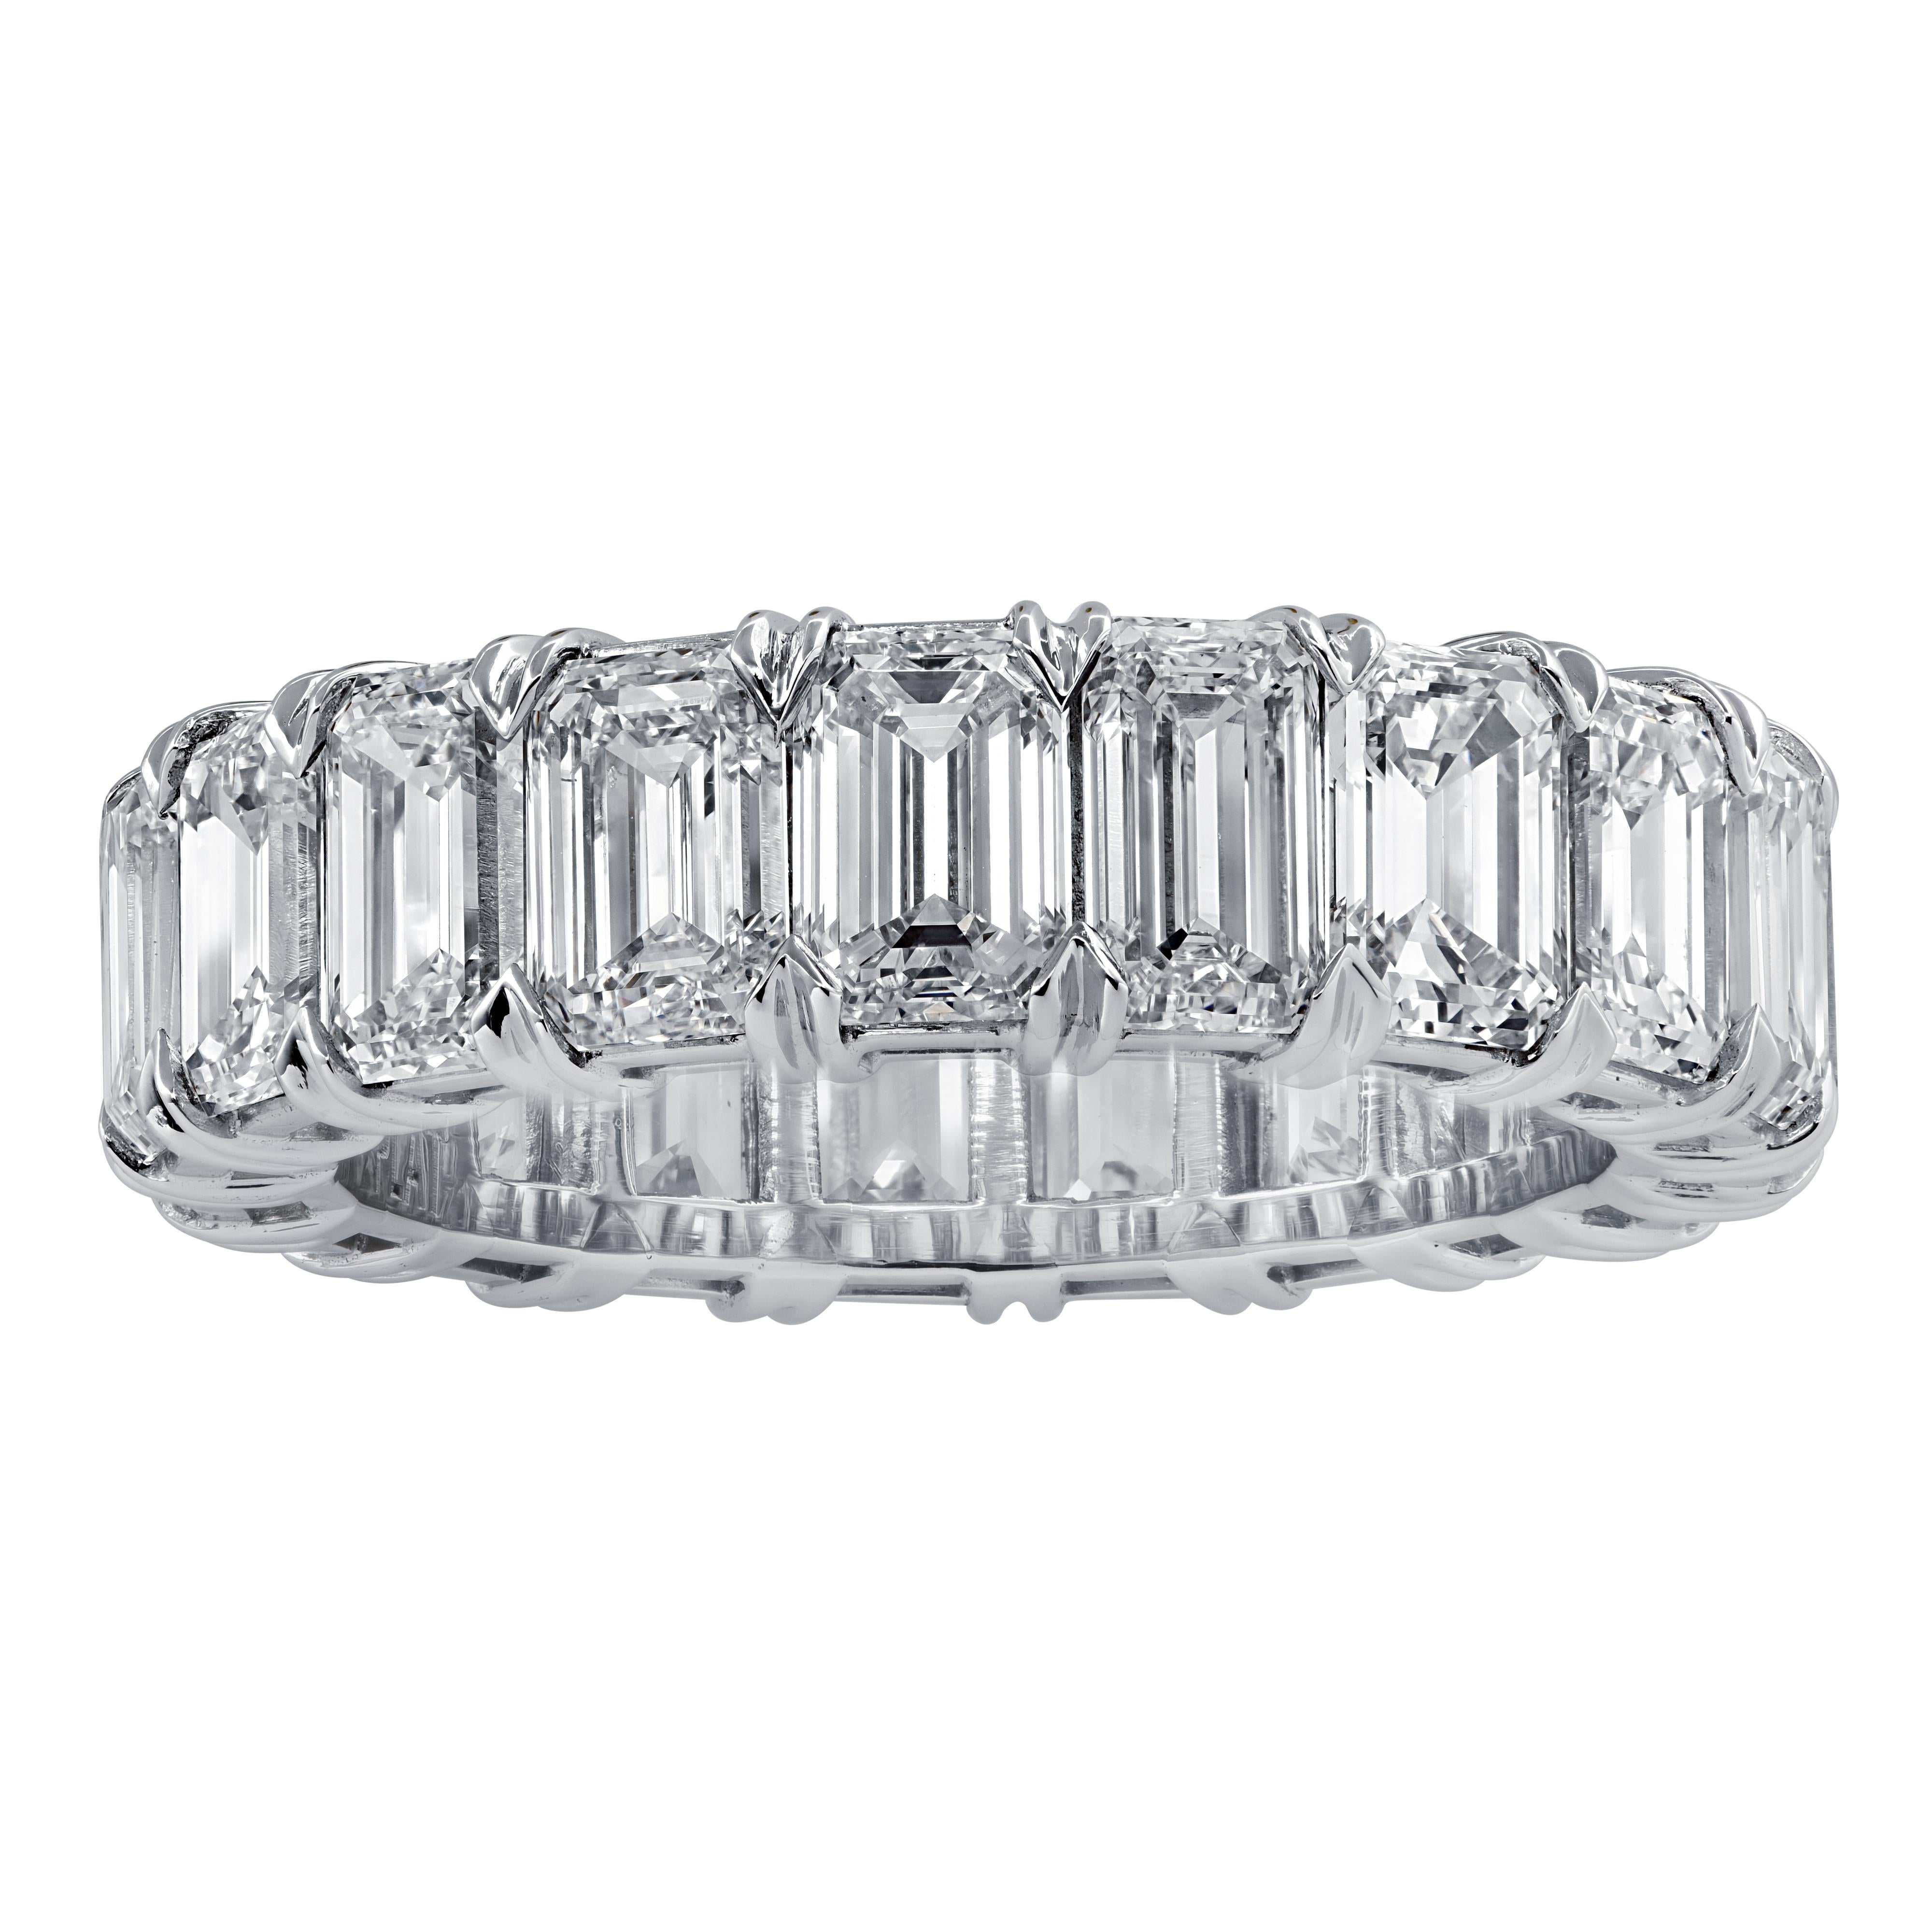 Exquisite eternity band crafted by hand in Platinum, showcasing 19 stunning GIA Certified emerald cut diamonds weighing 8.06 carats total, D-F color, IF-VS2 clarity. Each diamond is carefully selected, perfectly matched and set in a seamless sea of